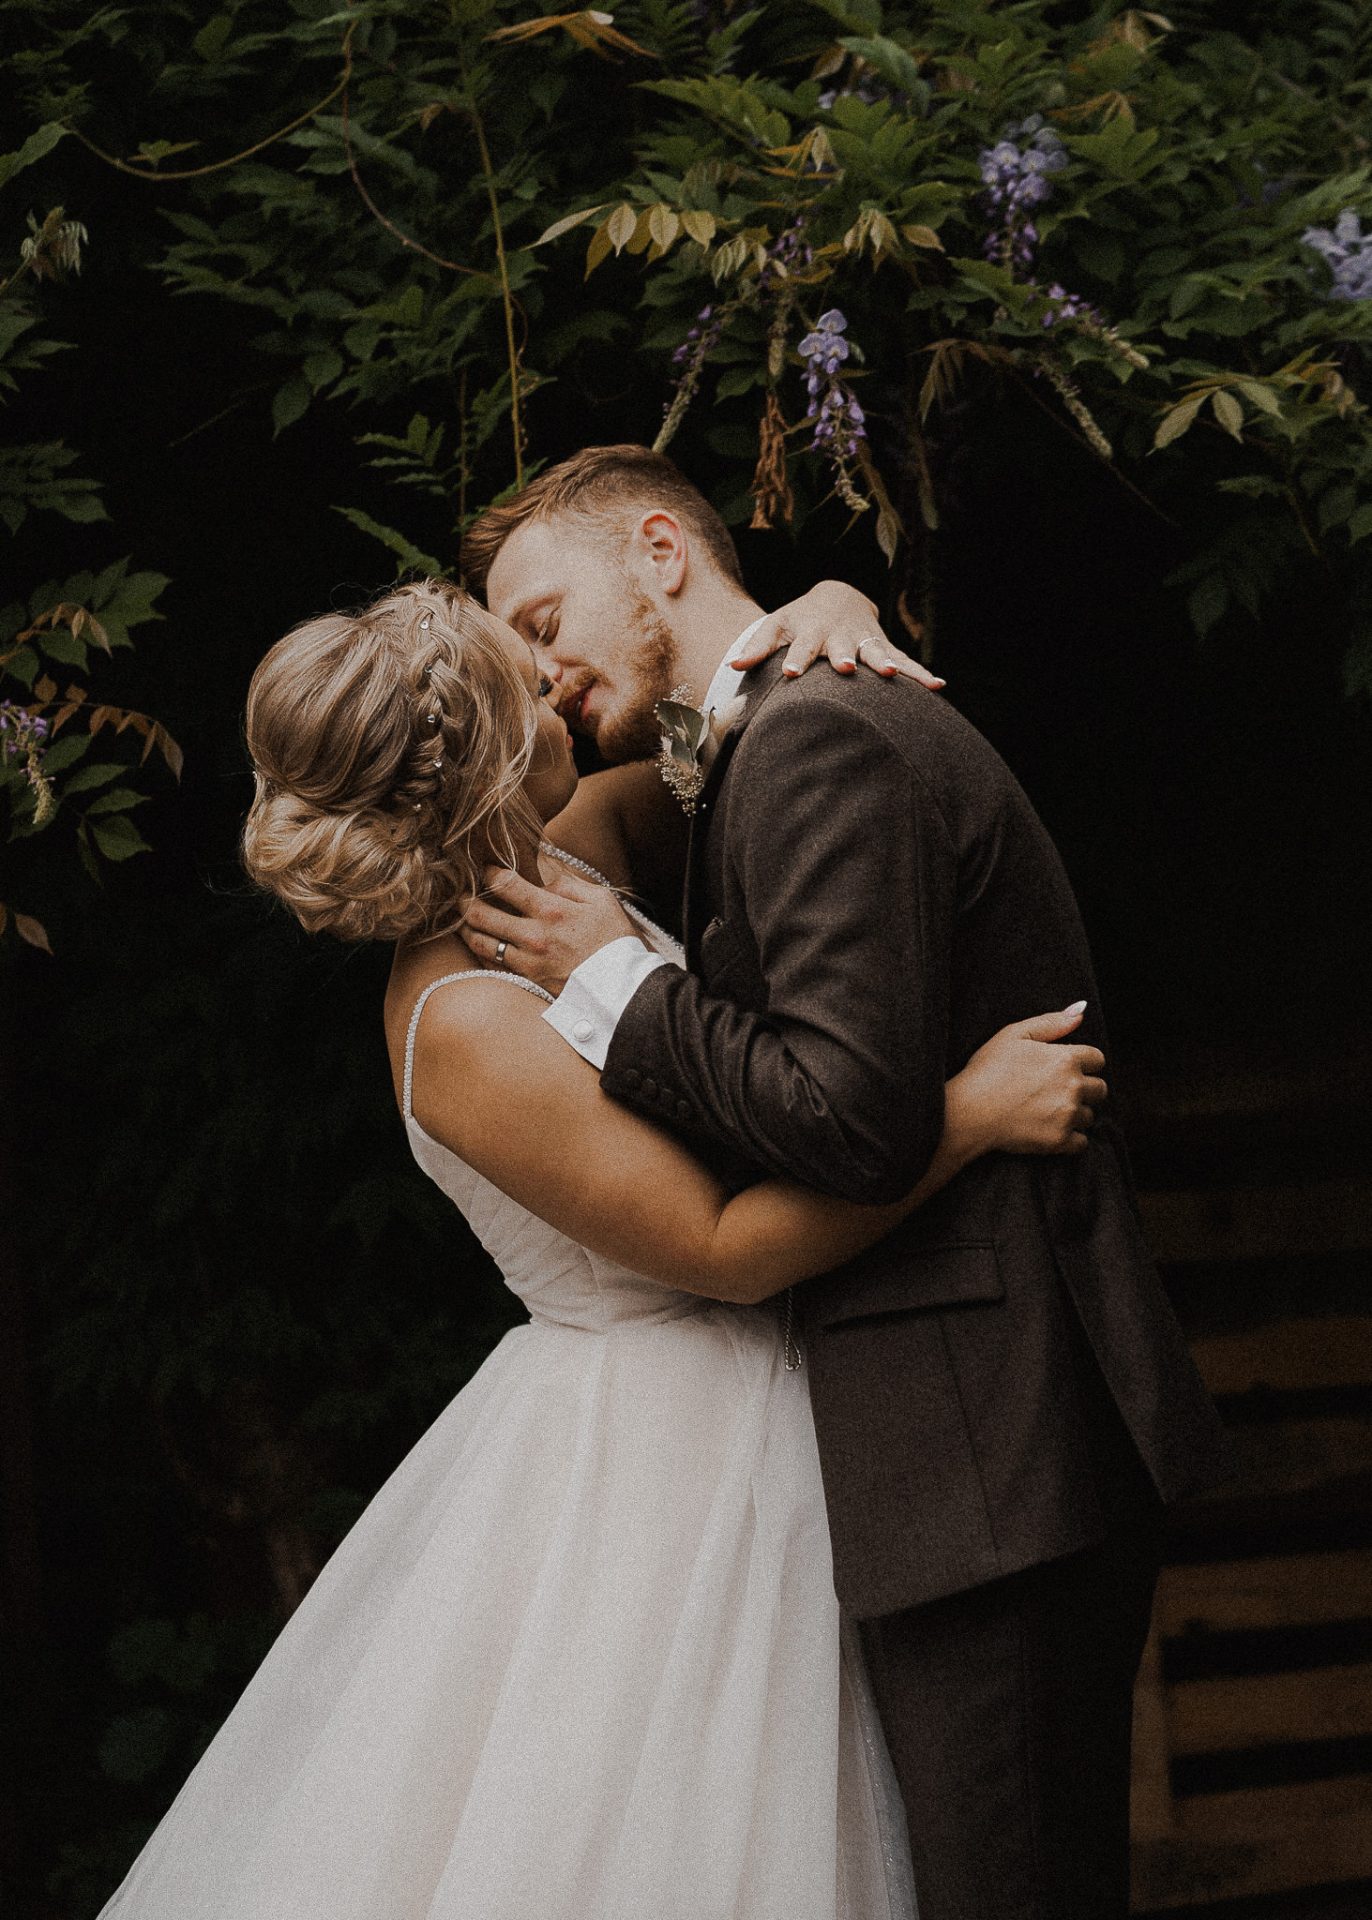 Wedding Photographs: Newlyweds kissing by a tree.